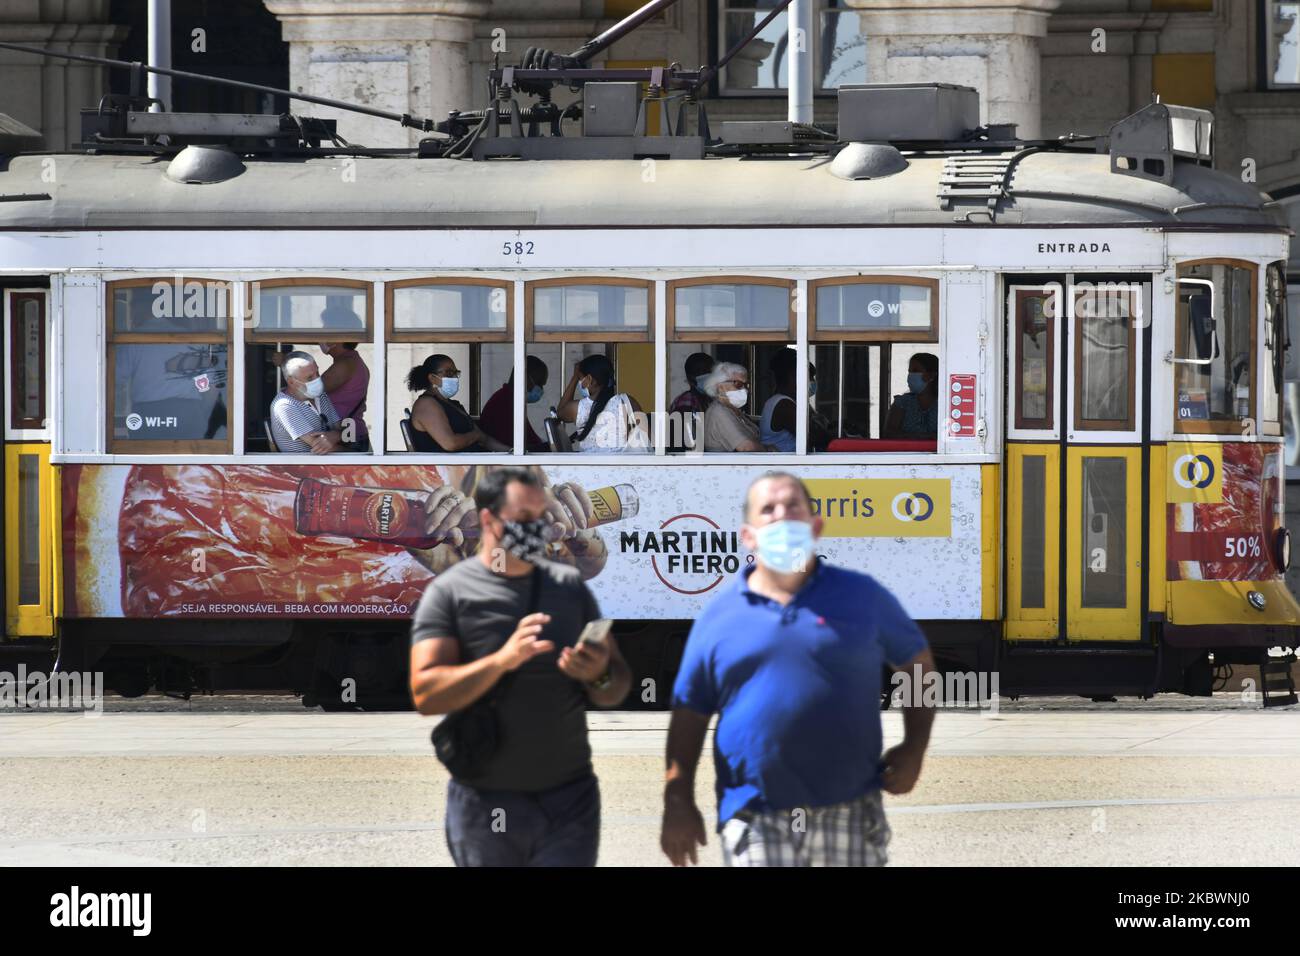 Two persons wearing protective masks walk near an electric train in Praça de Comércio, Lisbon, Portugal on 4 August 2020. Portugal registered on Monday, August 3, its first day without deaths from COVID-19 since mid-March and at the same time reported the lowest number of new cases in almost three months. The absence of deaths was highlighted at a press conference as a 'positive note of hope' by the Secretary of State for Health, António Lacerda Sales. (Photo by Jorge Mantilla/NurPhoto) Stock Photo